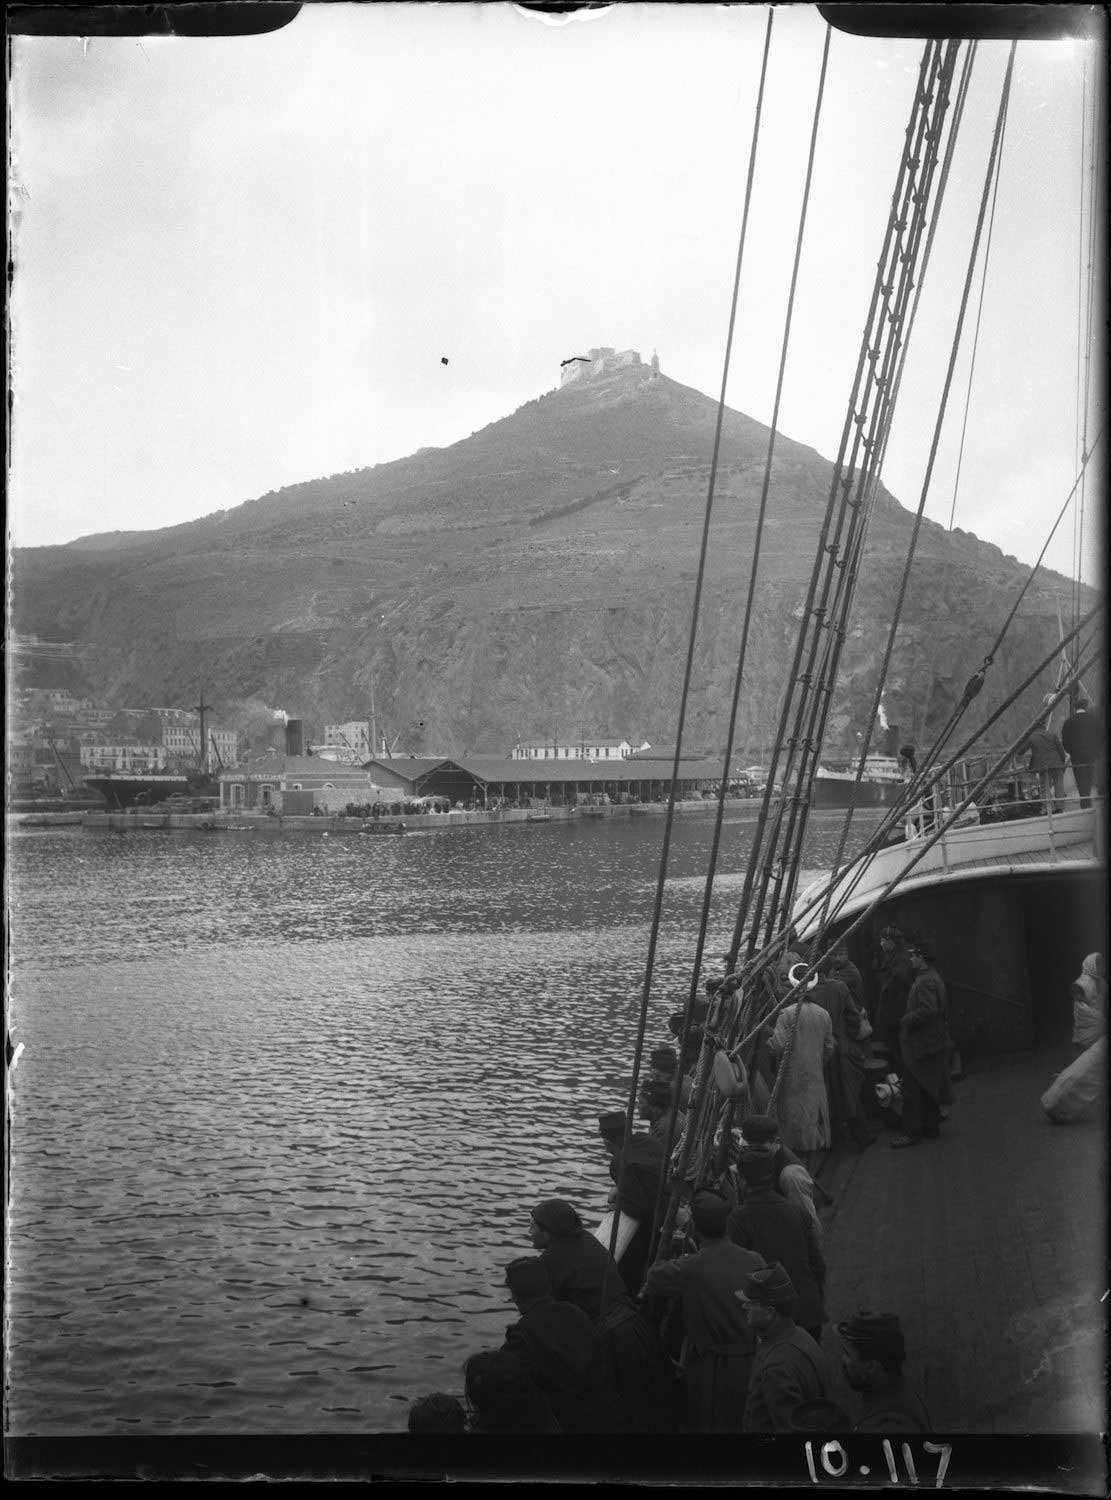 View of passengers arriving in the port of Oran